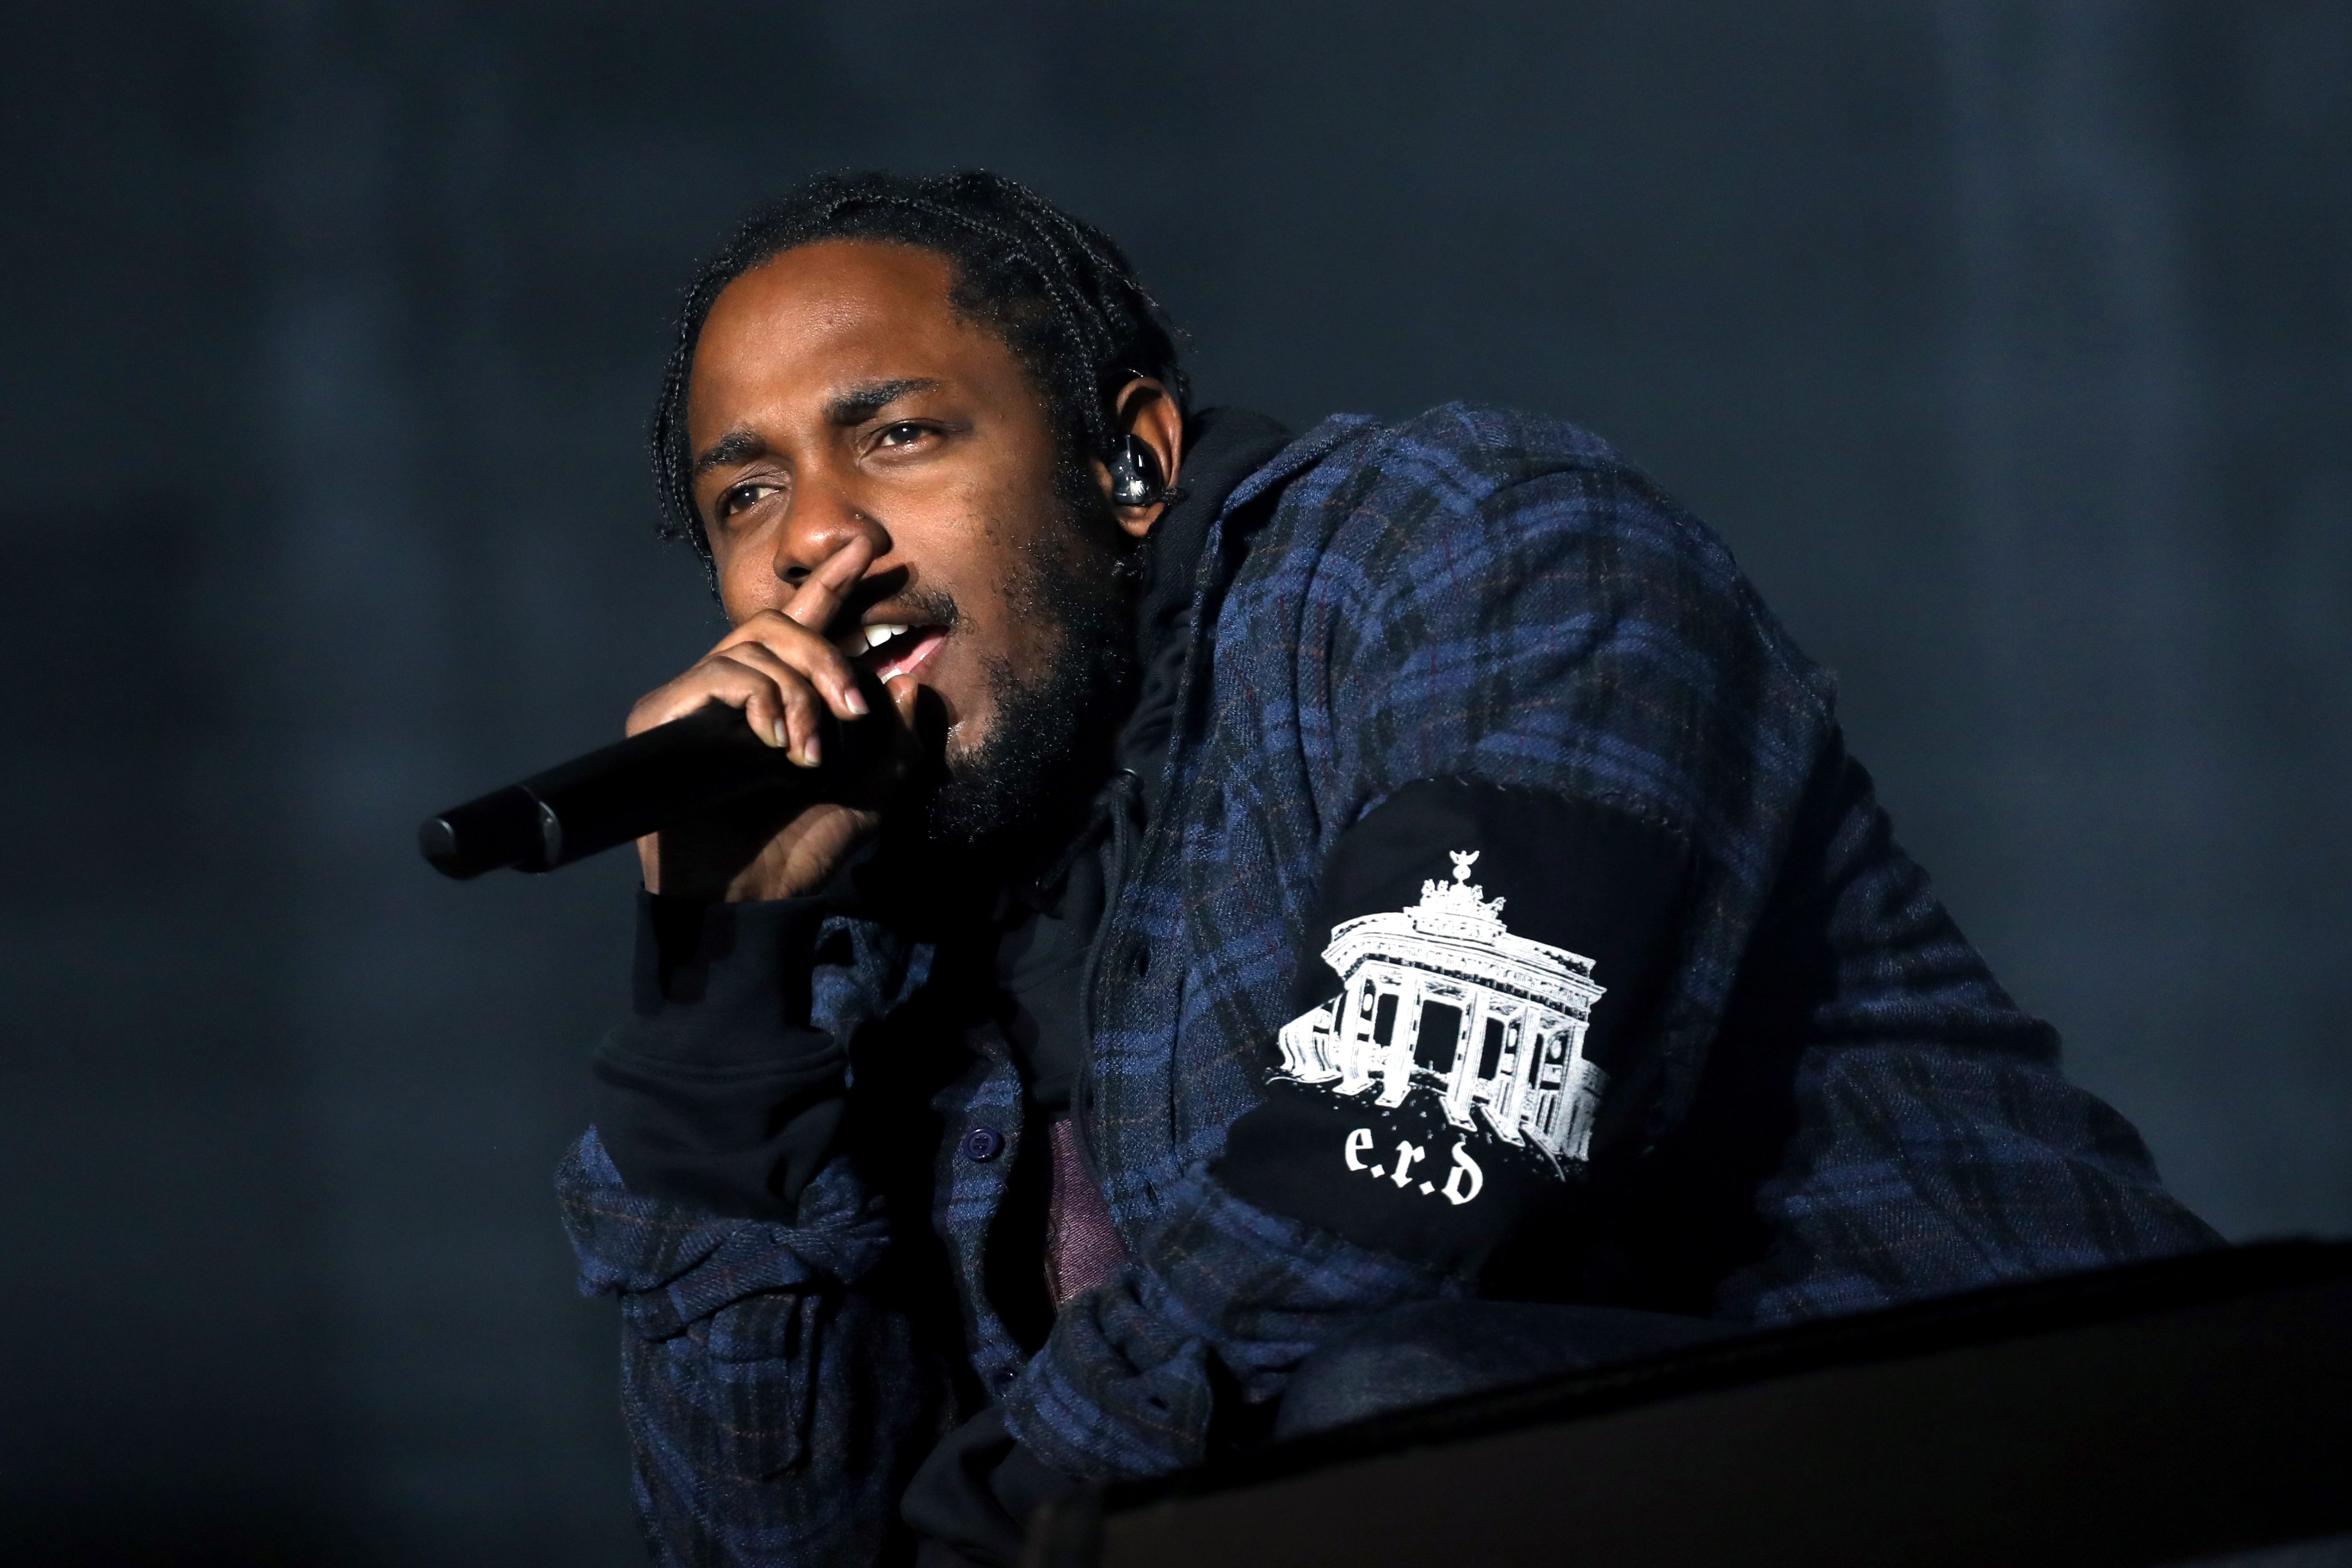 Kendrick Lamar performs on the Samsung Stage at Austin City Limits Music Festival 2016 at Zilker Park on Oct. 1, 2016 in Austin, Texas. (Rick Kern—Getty Images for Samsung)